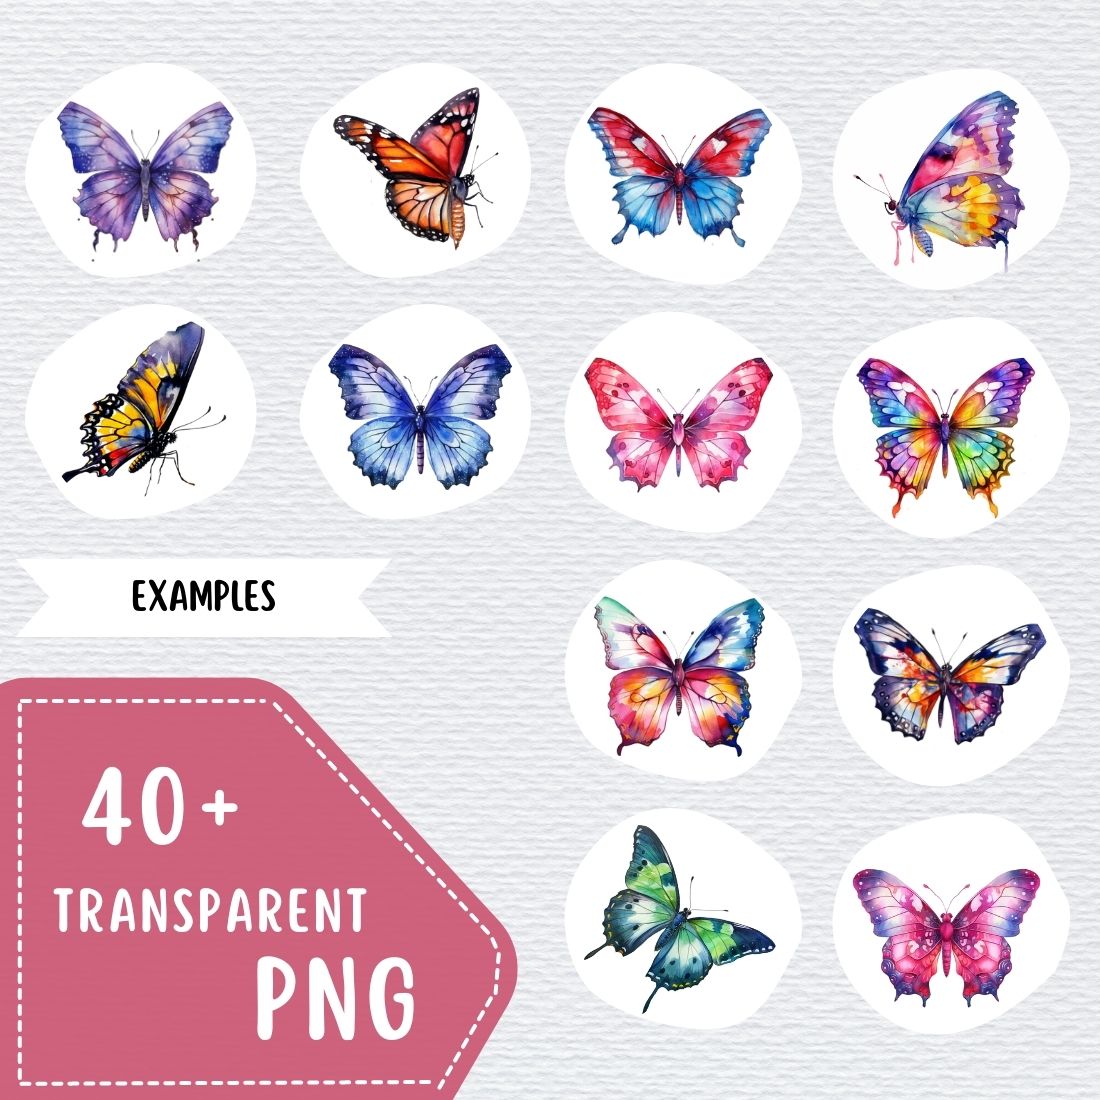 41 Watercolor Butterflies PNG, Butterfly Clipart, Transparent, Digital Paper Craft, illustrations, watercolor clipart, Digital Paper Craft preview image.